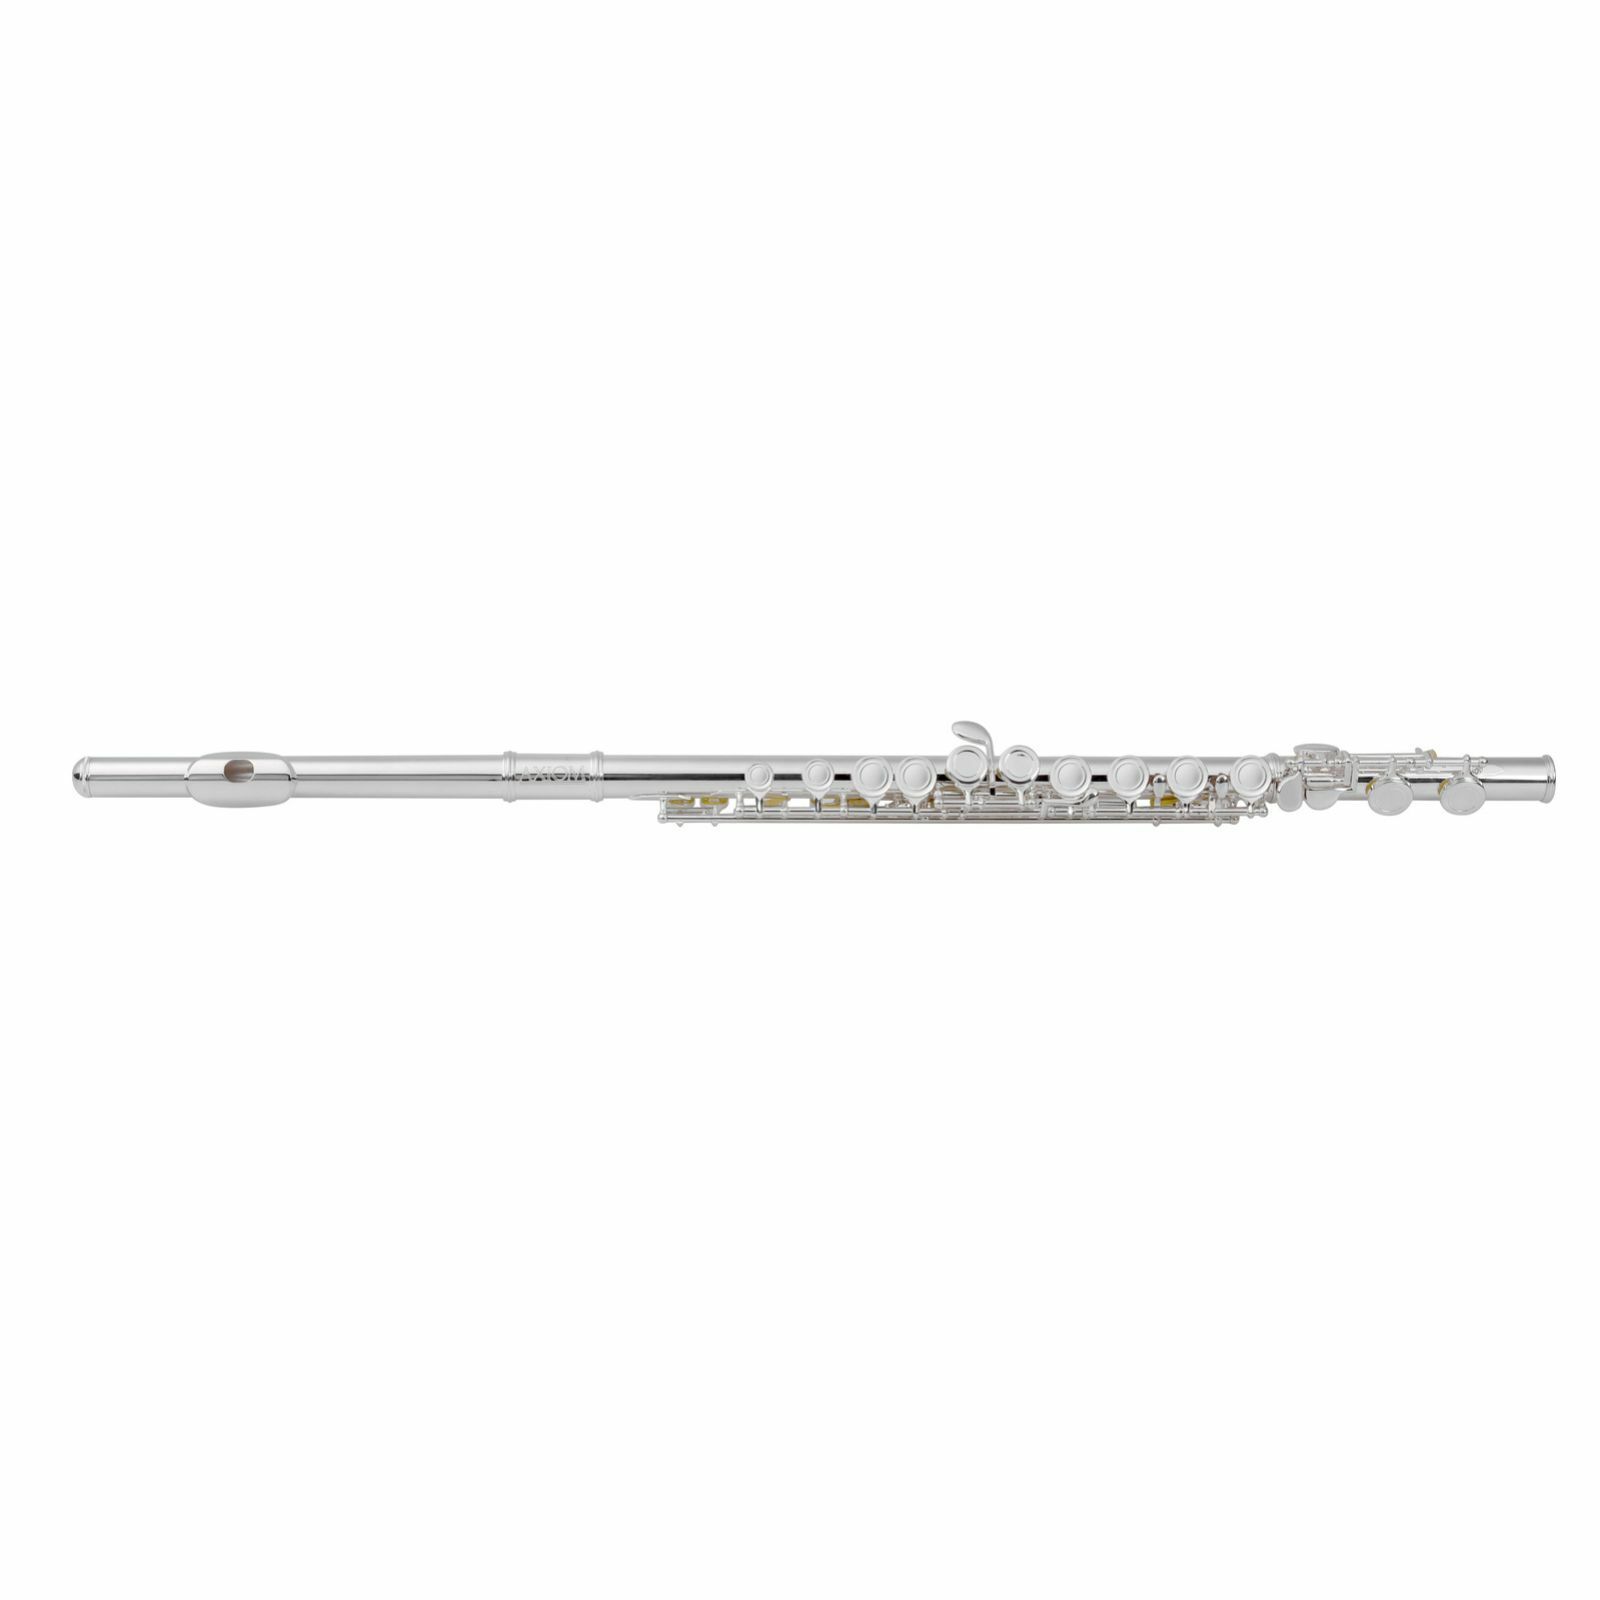 Axiom Prelude Flute Outfit - School Band Flute